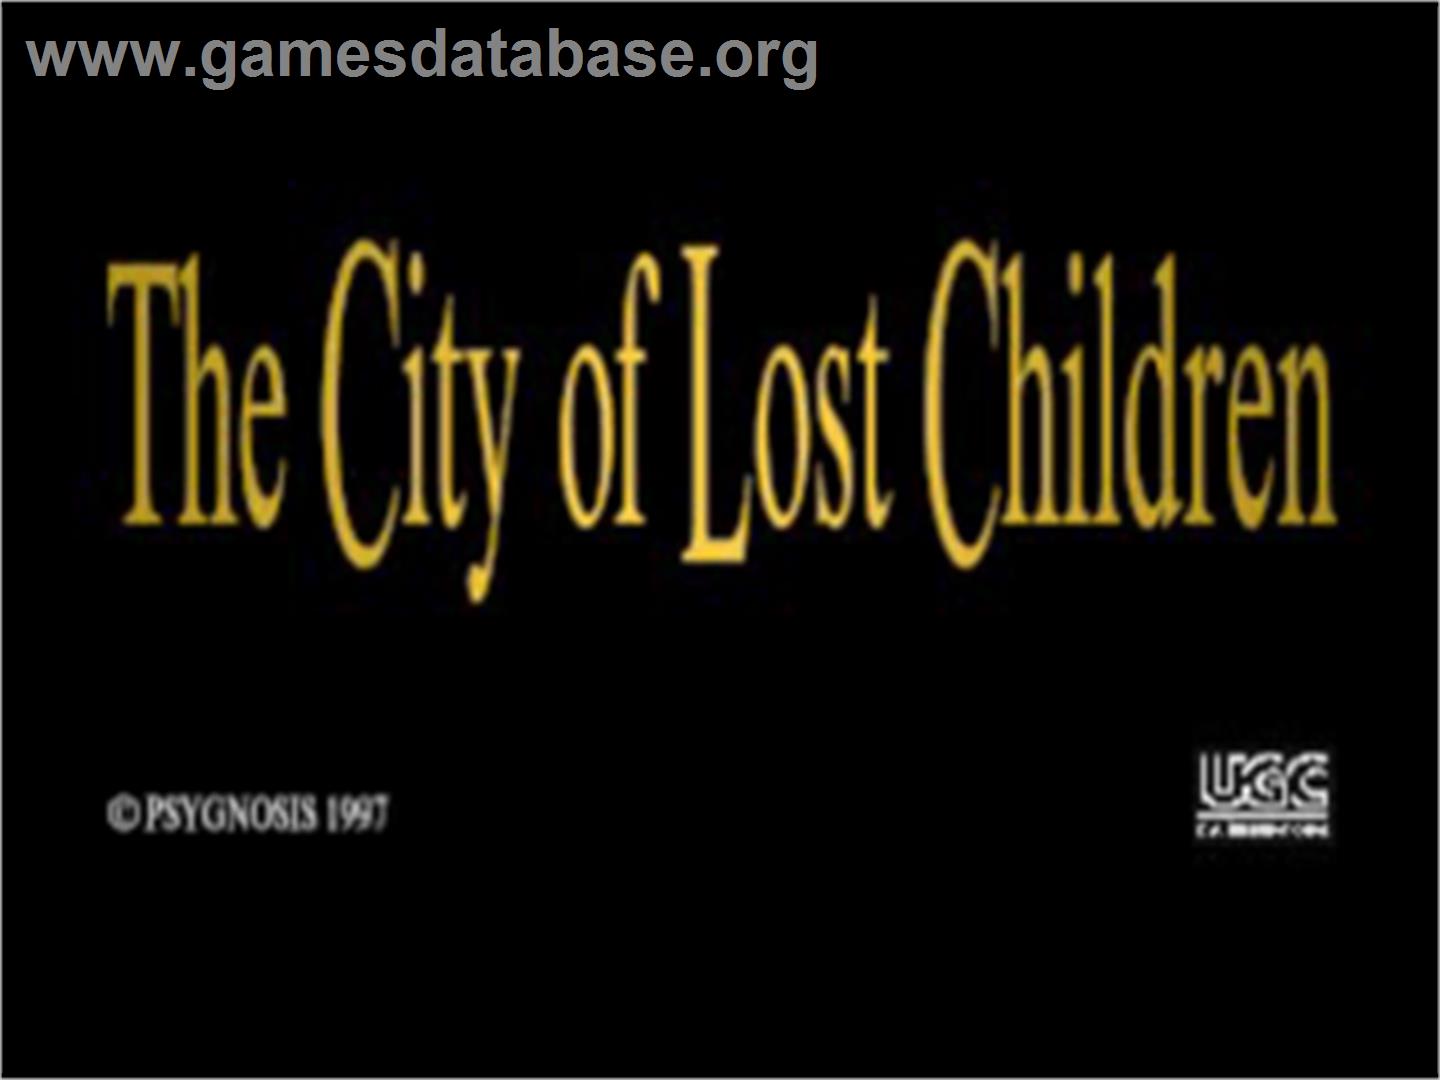 The City of Lost Children - Sony Playstation - Artwork - Title Screen